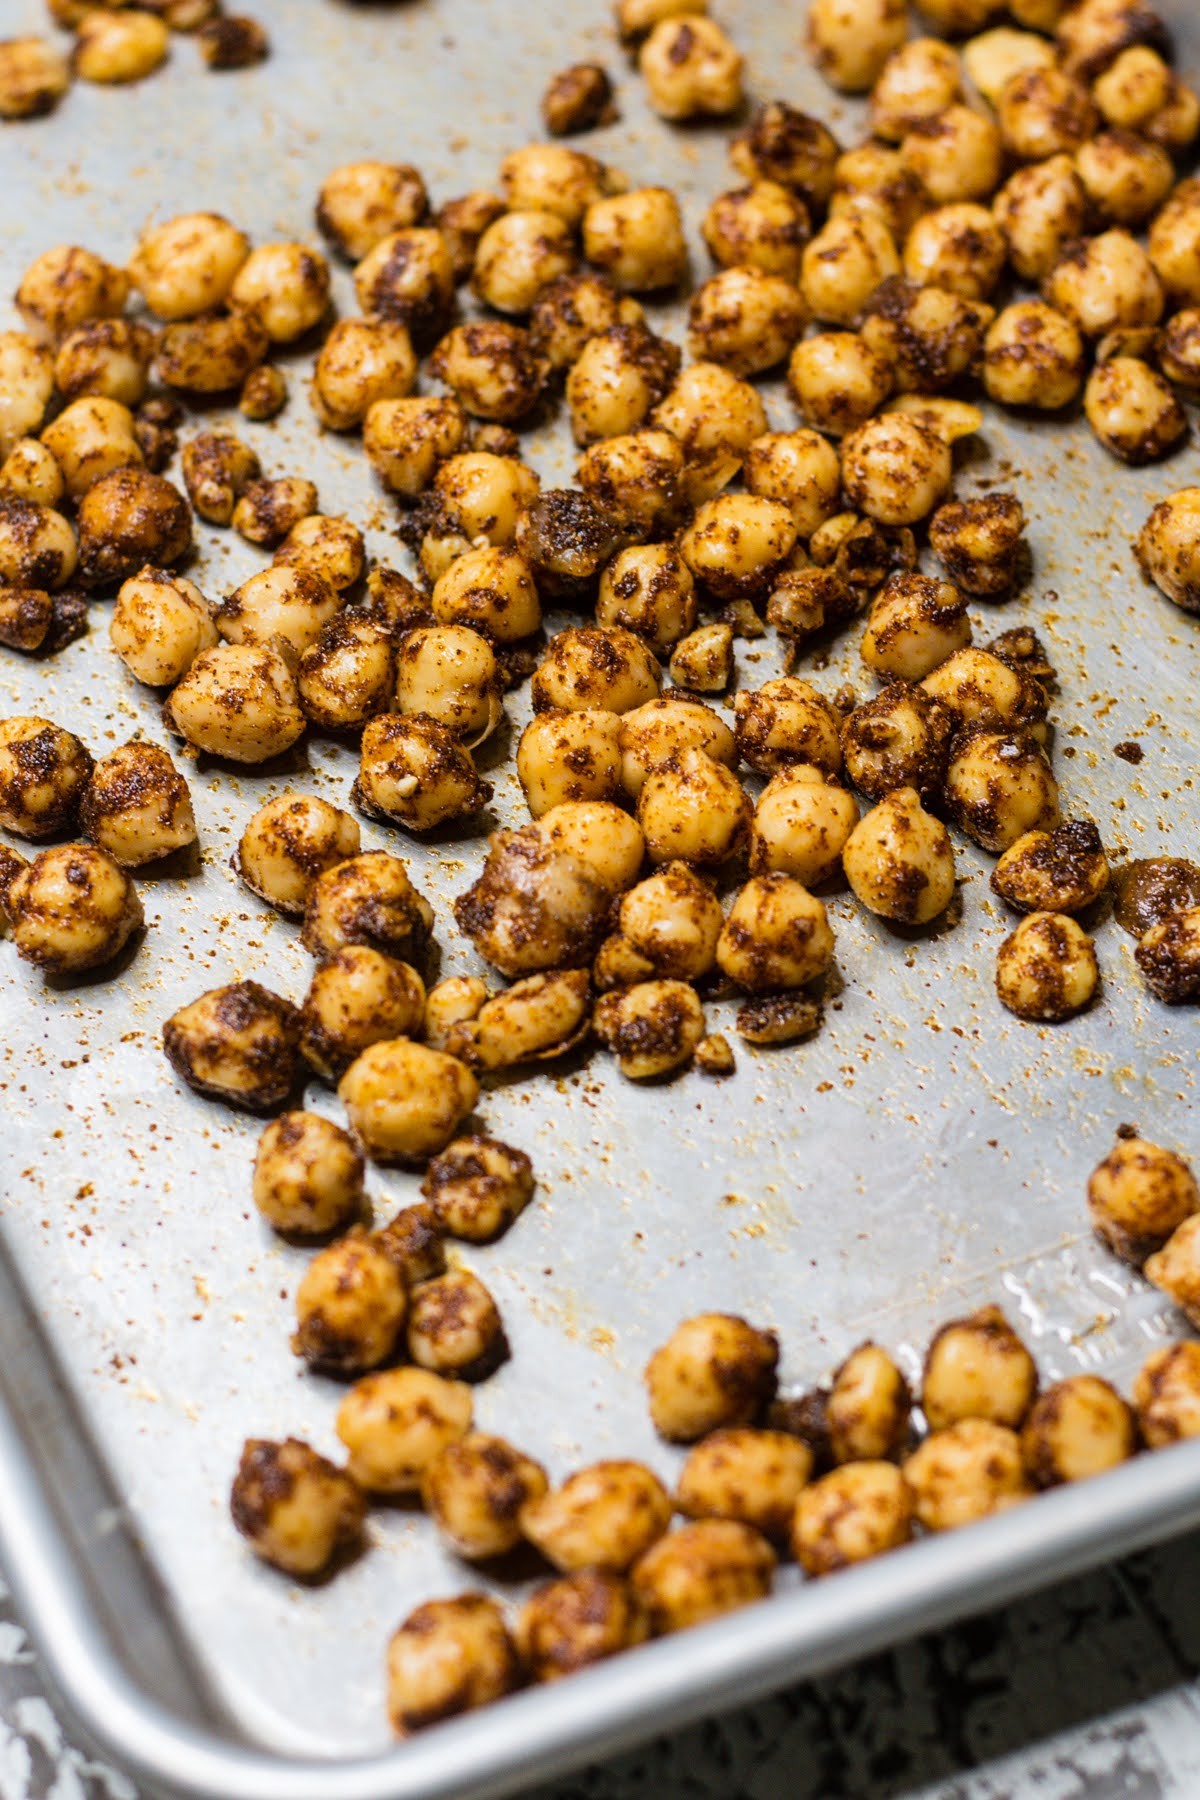 Roasted chickpeas that have been seasoned with spices and oil.